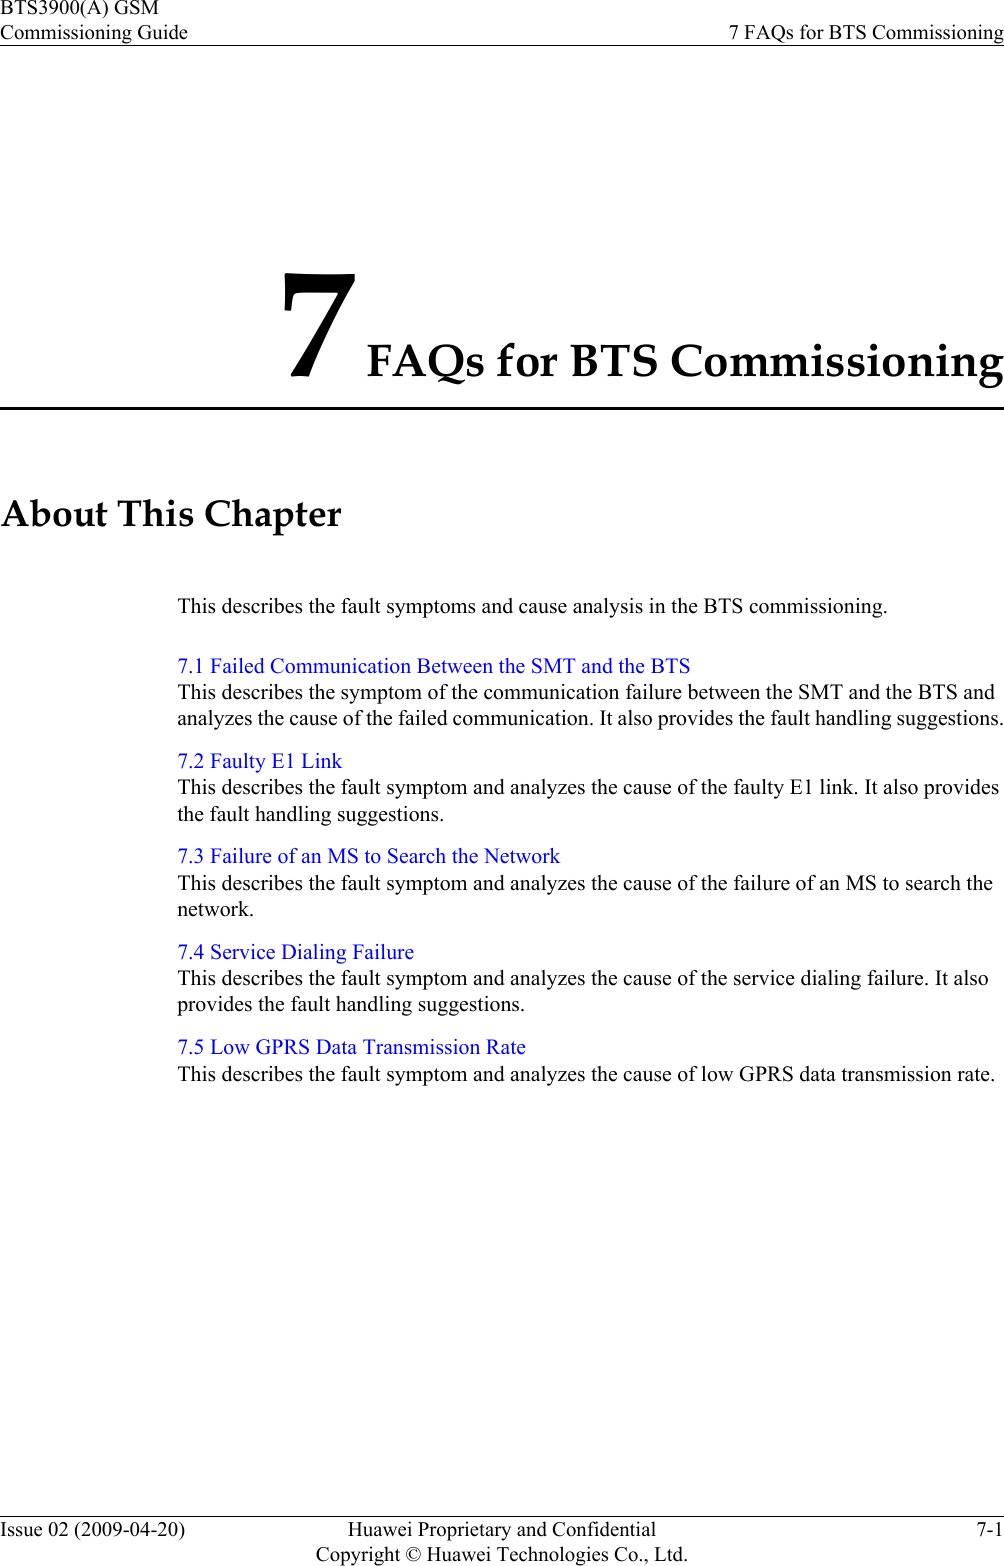 7 FAQs for BTS CommissioningAbout This ChapterThis describes the fault symptoms and cause analysis in the BTS commissioning.7.1 Failed Communication Between the SMT and the BTSThis describes the symptom of the communication failure between the SMT and the BTS andanalyzes the cause of the failed communication. It also provides the fault handling suggestions.7.2 Faulty E1 LinkThis describes the fault symptom and analyzes the cause of the faulty E1 link. It also providesthe fault handling suggestions.7.3 Failure of an MS to Search the NetworkThis describes the fault symptom and analyzes the cause of the failure of an MS to search thenetwork.7.4 Service Dialing FailureThis describes the fault symptom and analyzes the cause of the service dialing failure. It alsoprovides the fault handling suggestions.7.5 Low GPRS Data Transmission RateThis describes the fault symptom and analyzes the cause of low GPRS data transmission rate.BTS3900(A) GSMCommissioning Guide 7 FAQs for BTS CommissioningIssue 02 (2009-04-20) Huawei Proprietary and ConfidentialCopyright © Huawei Technologies Co., Ltd.7-1